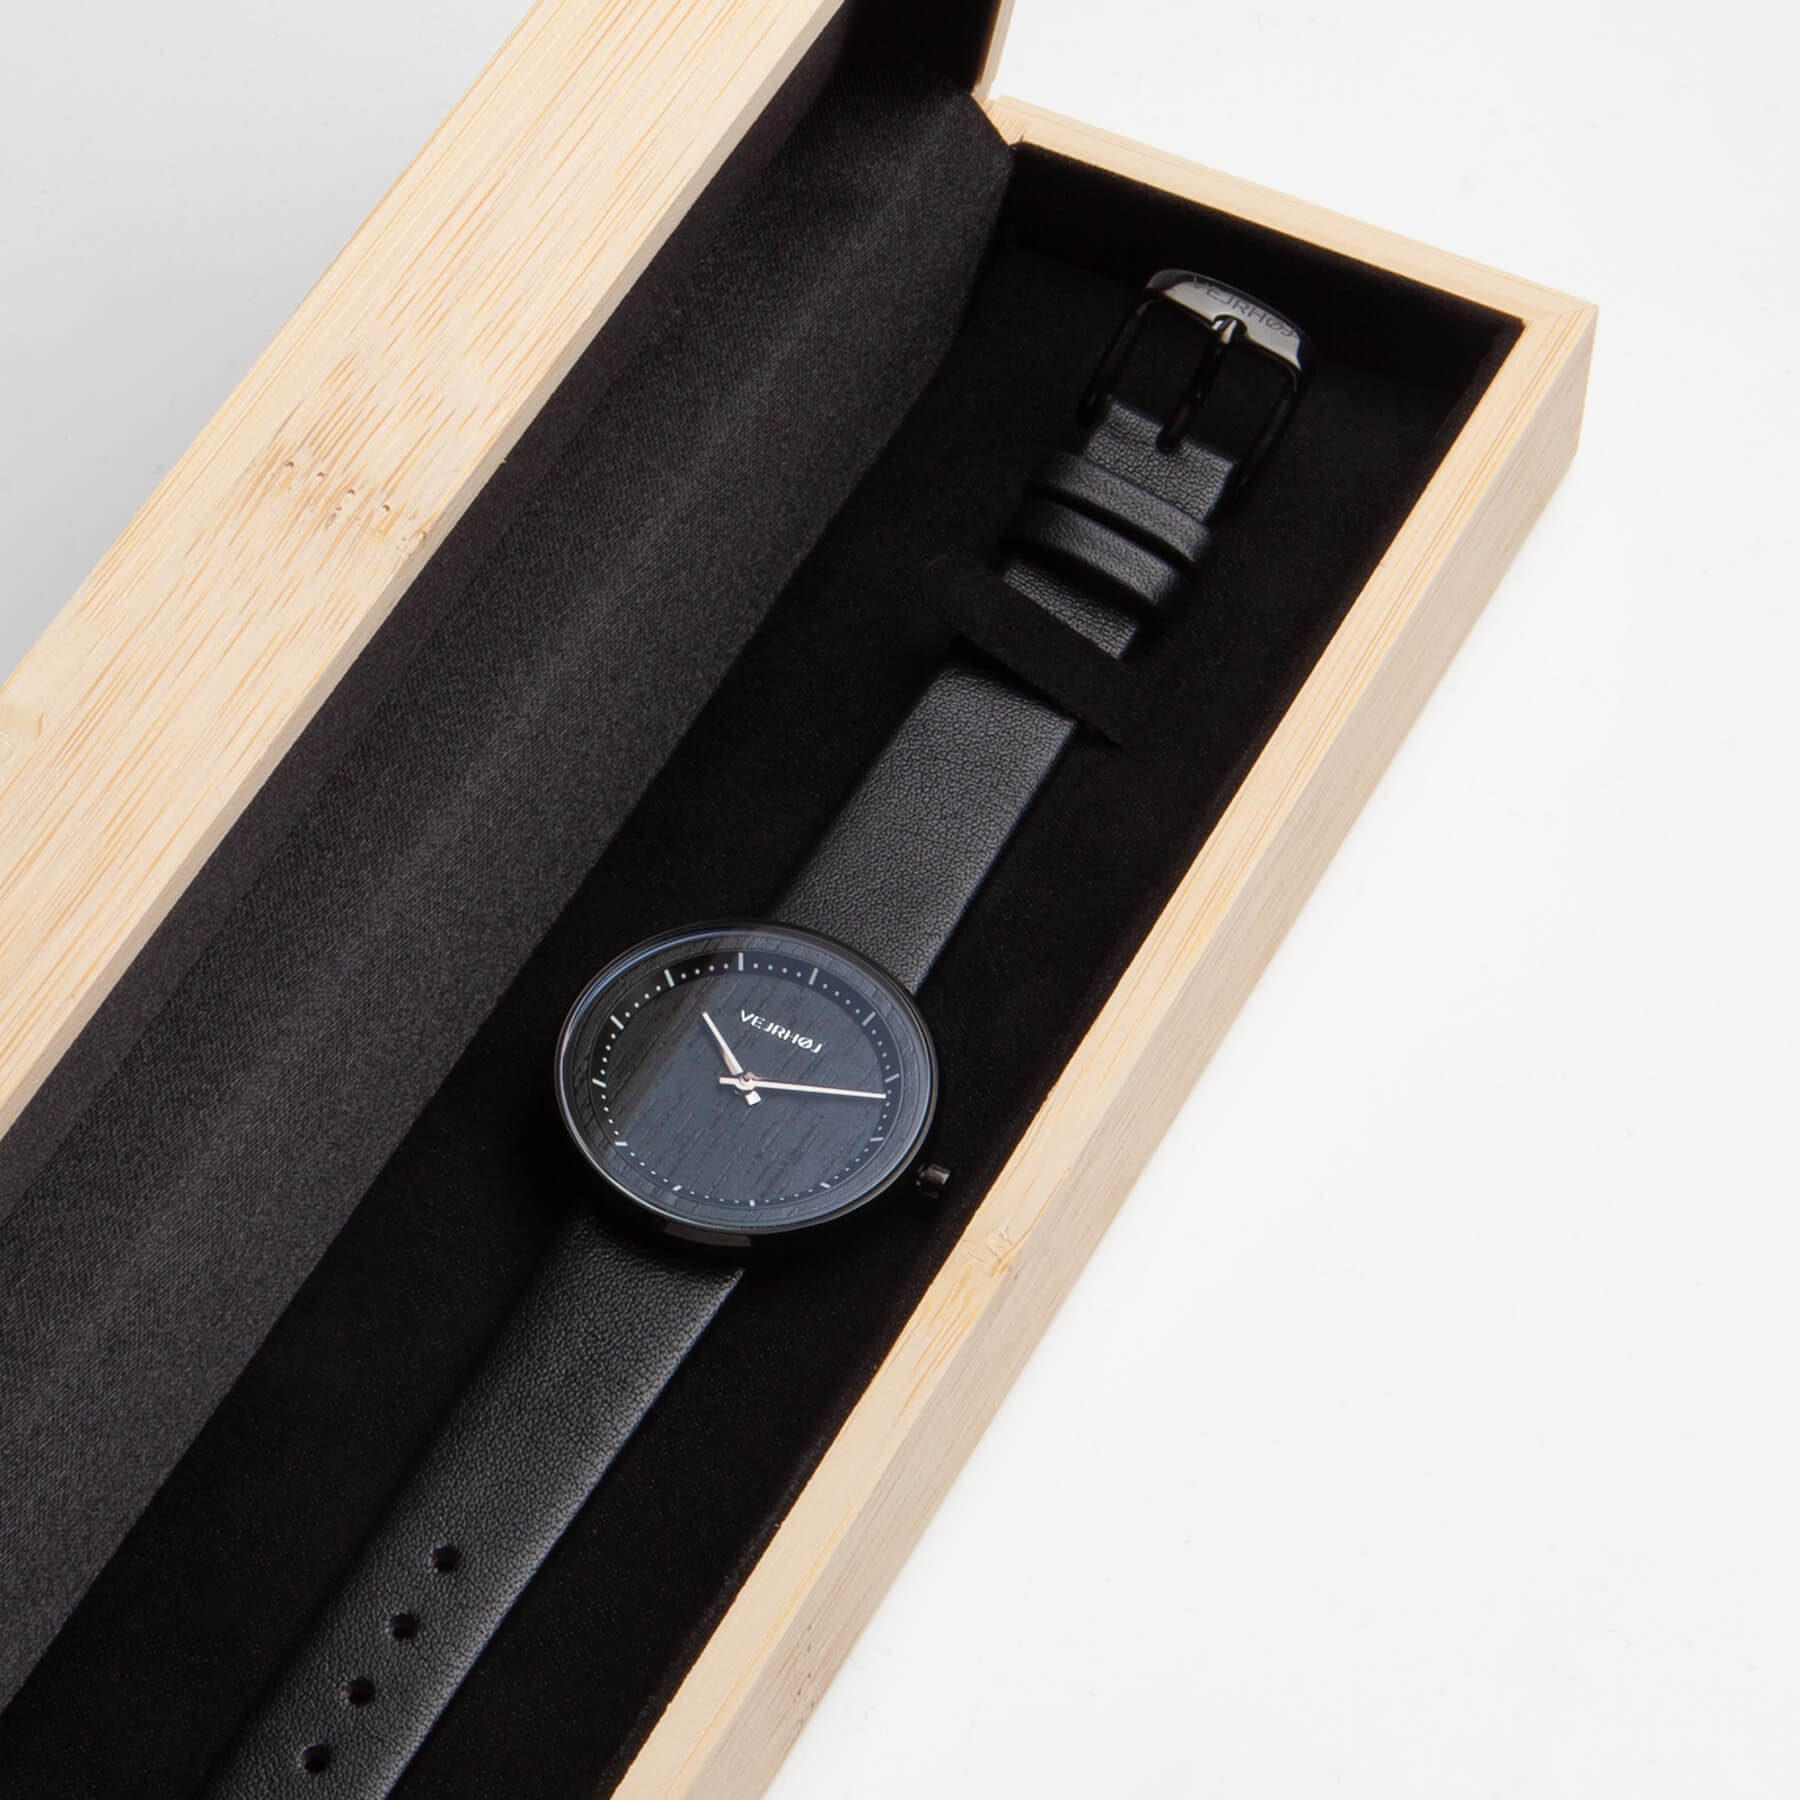 Black watch for women with white hour markings in a wooden box